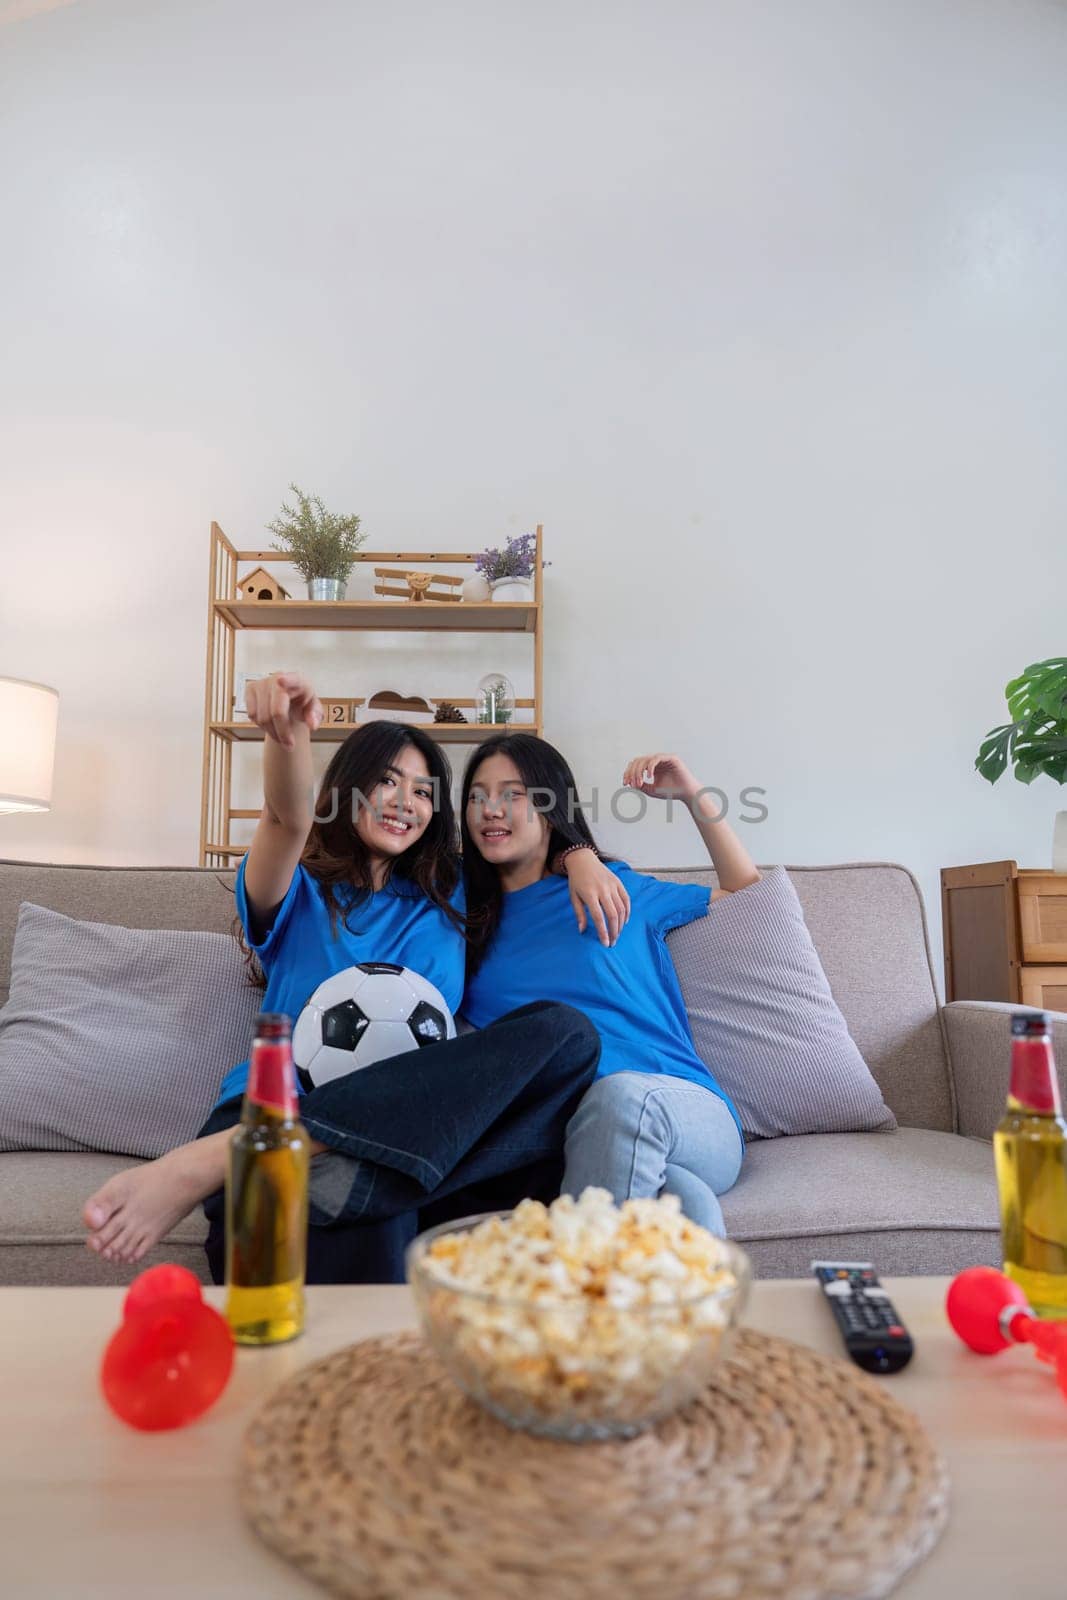 Lesbian couple cheering for Euro football at home with popcorn and drinks. Concept of sports enthusiasm and LGBTQ pride.